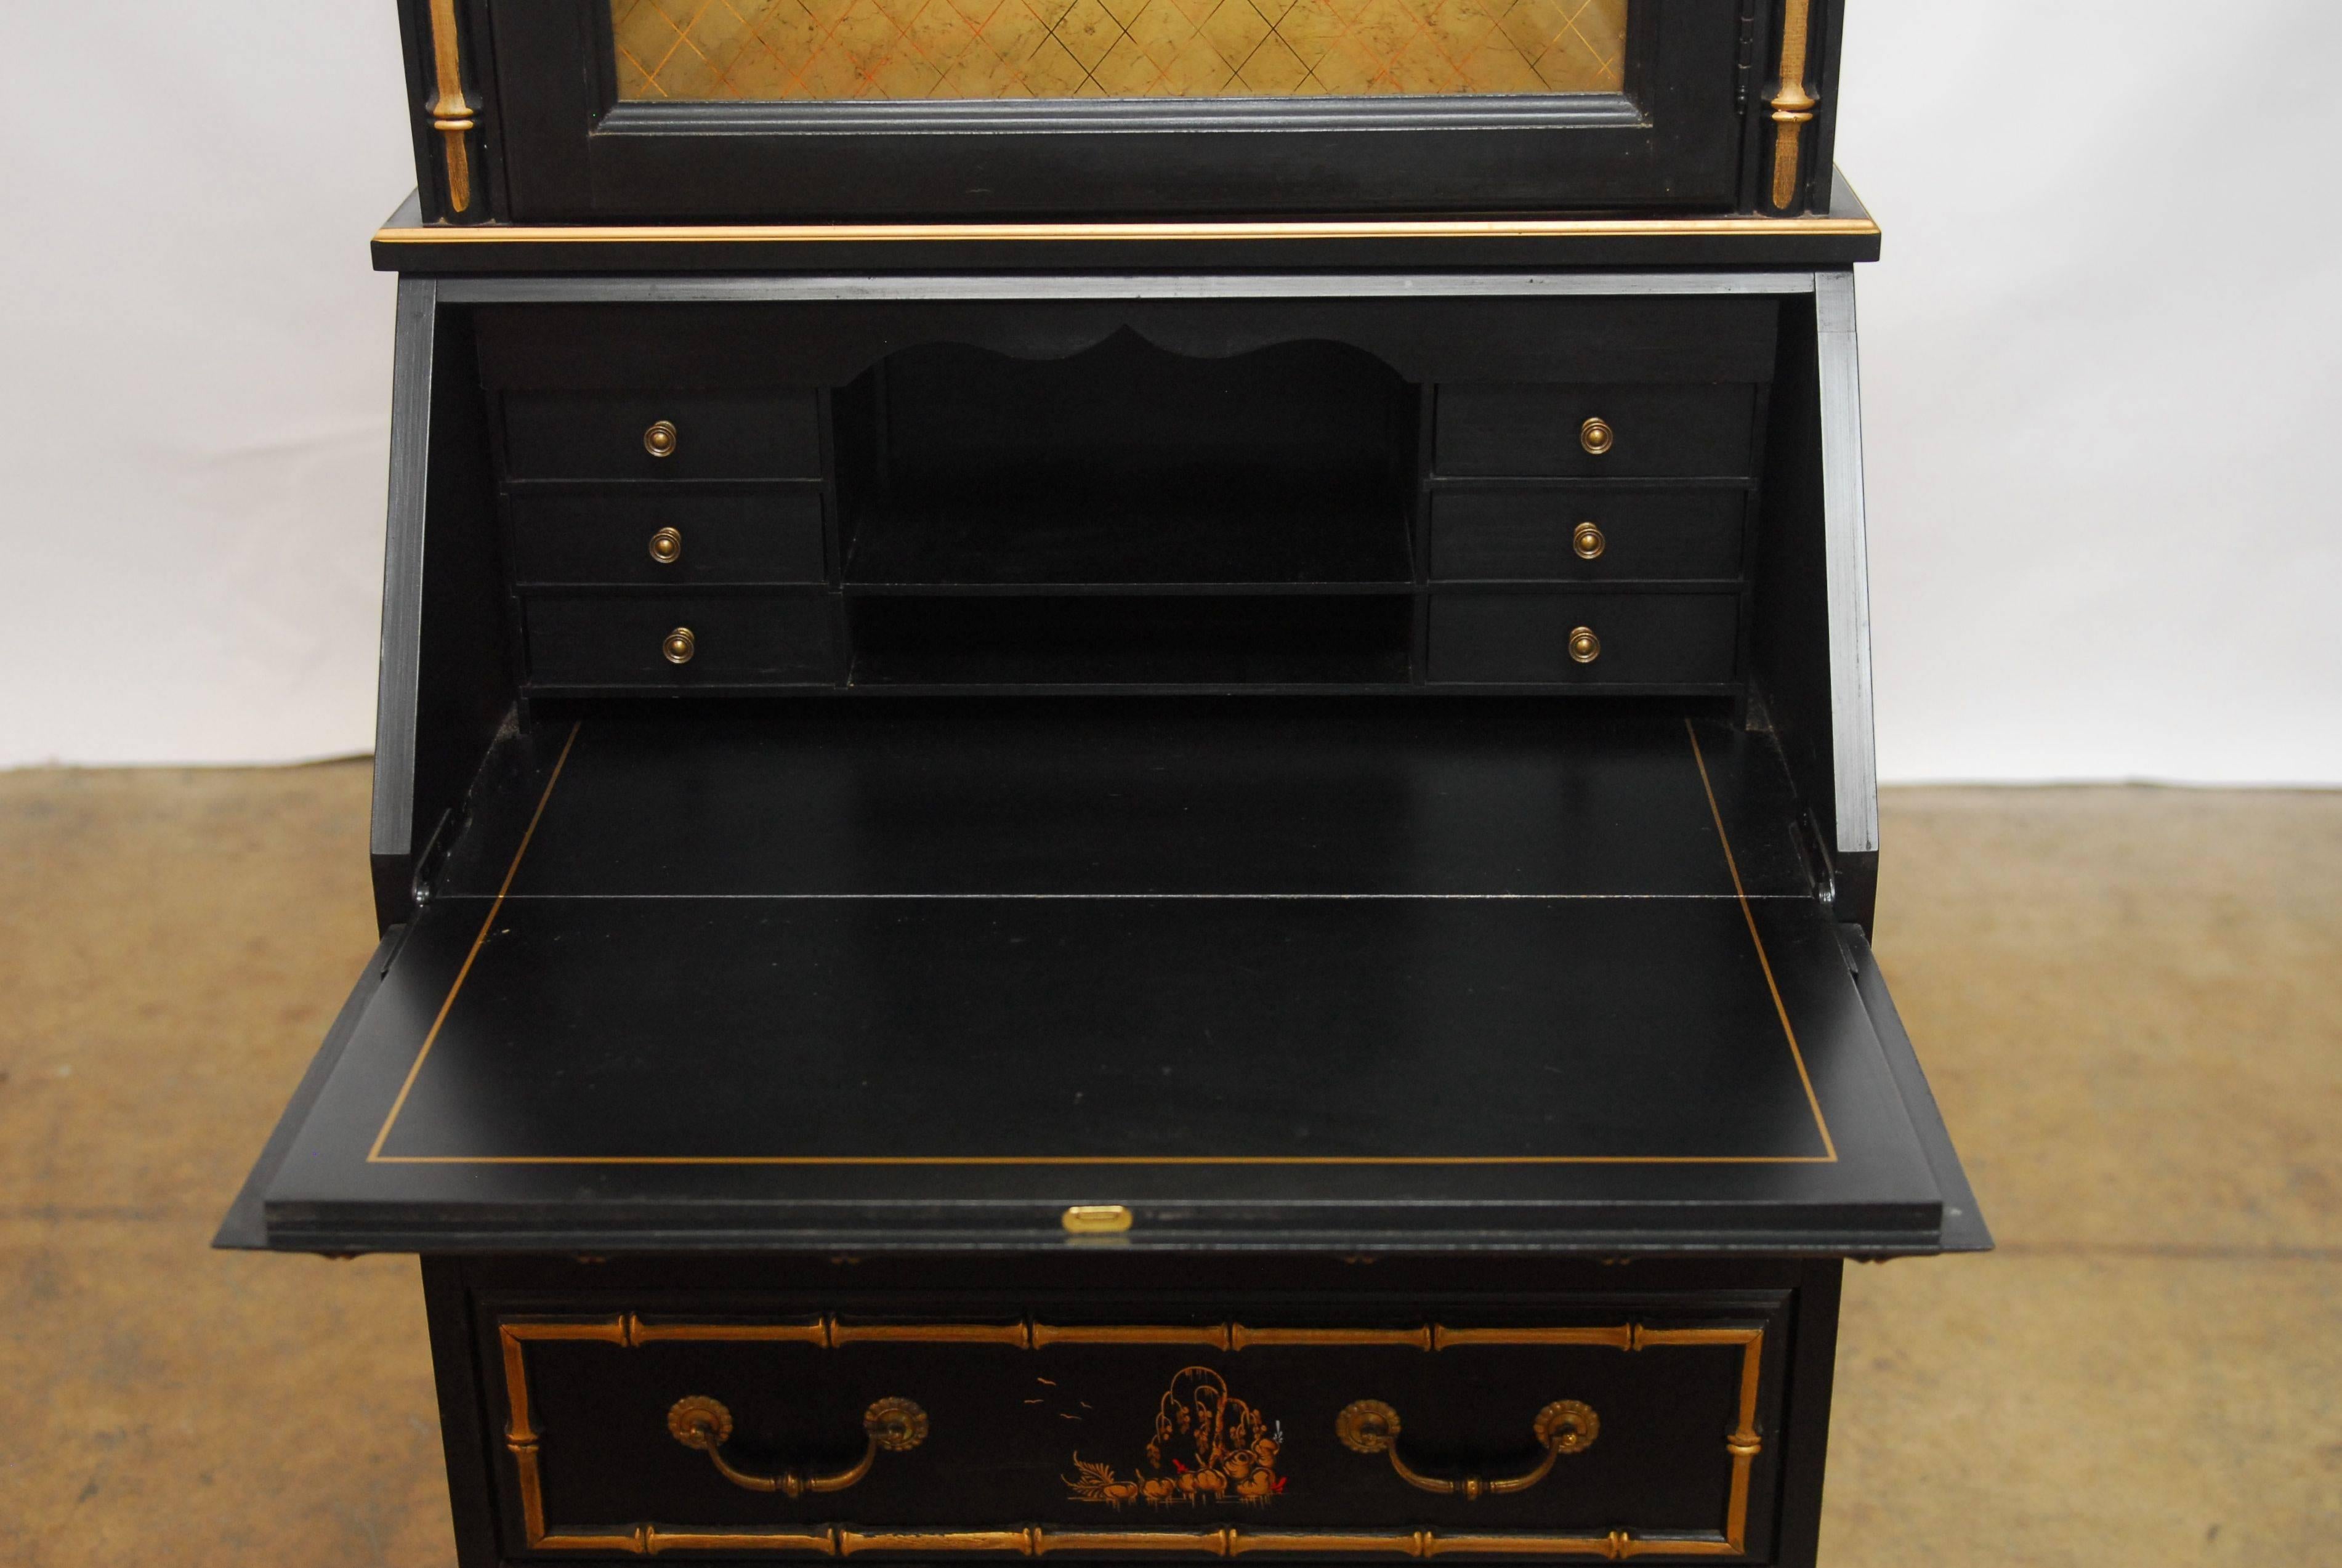 Distinctive secretary bookcase made in the Chinese taste featuring a decorative gilt faux bamboo trimmed case with hand-painted asian scenes. The domed top has a lighted interior with two glass shelves and a locking concave glass door with fine gilt